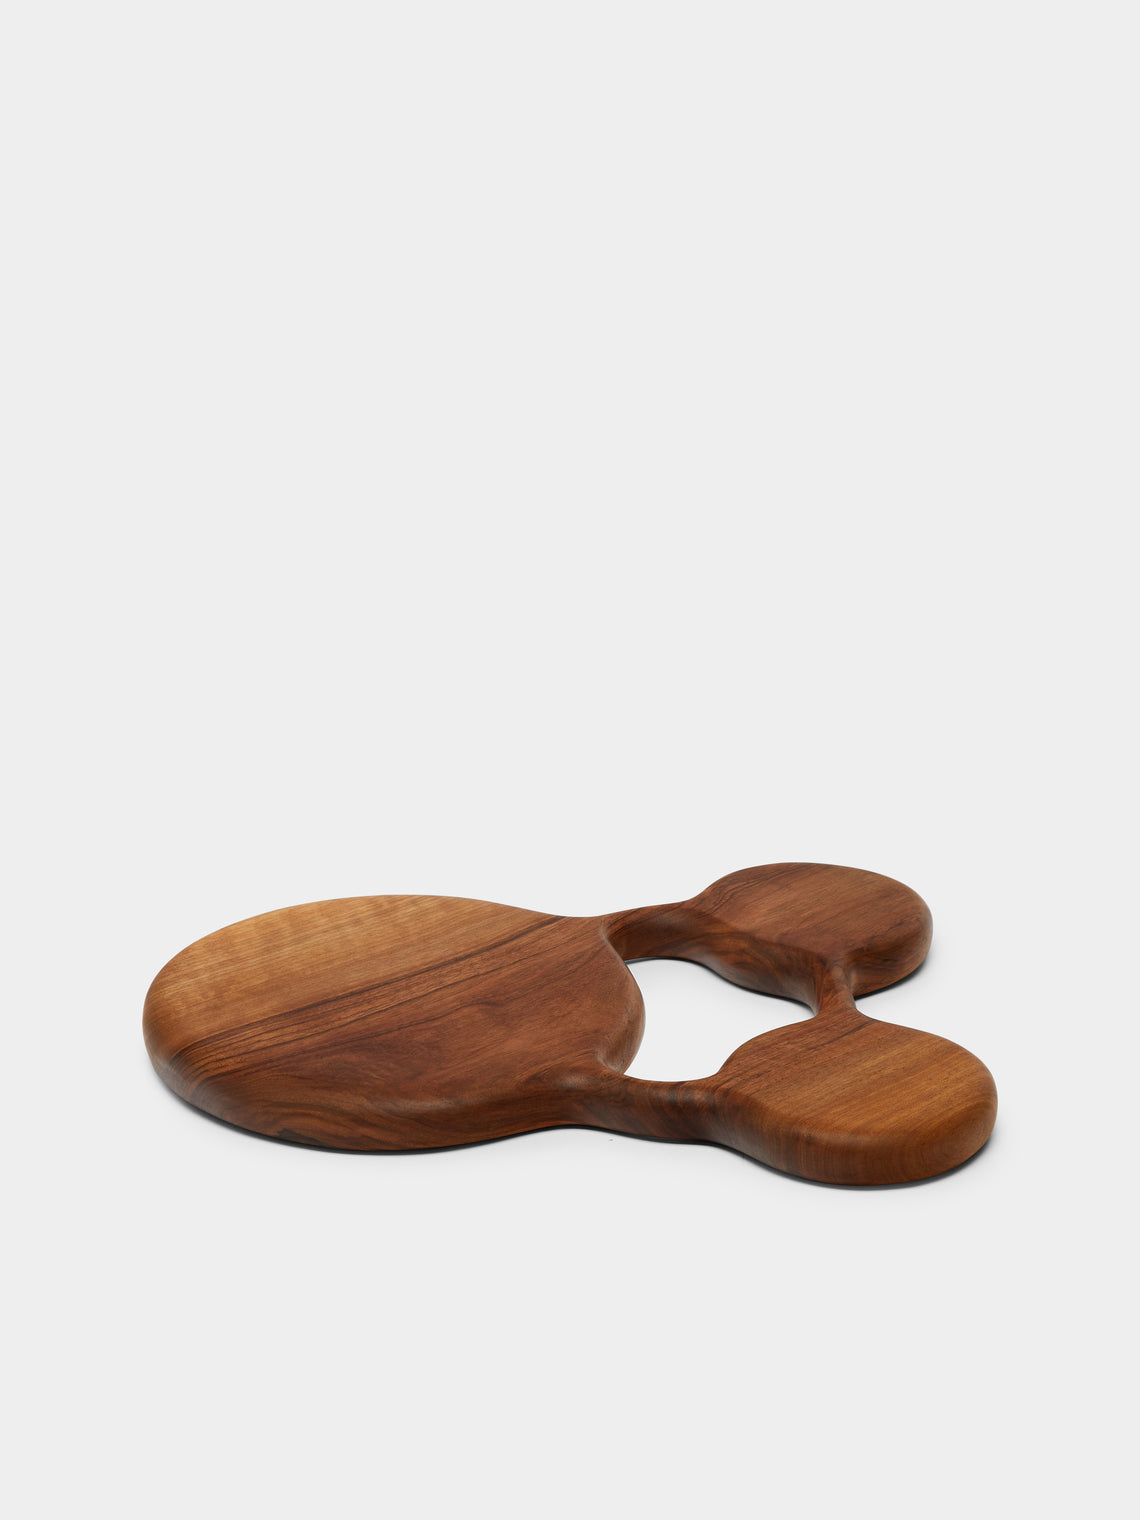 Lucas Castex - No. 4 Hand-Carved Oiled Walnut Serving Board -  - ABASK